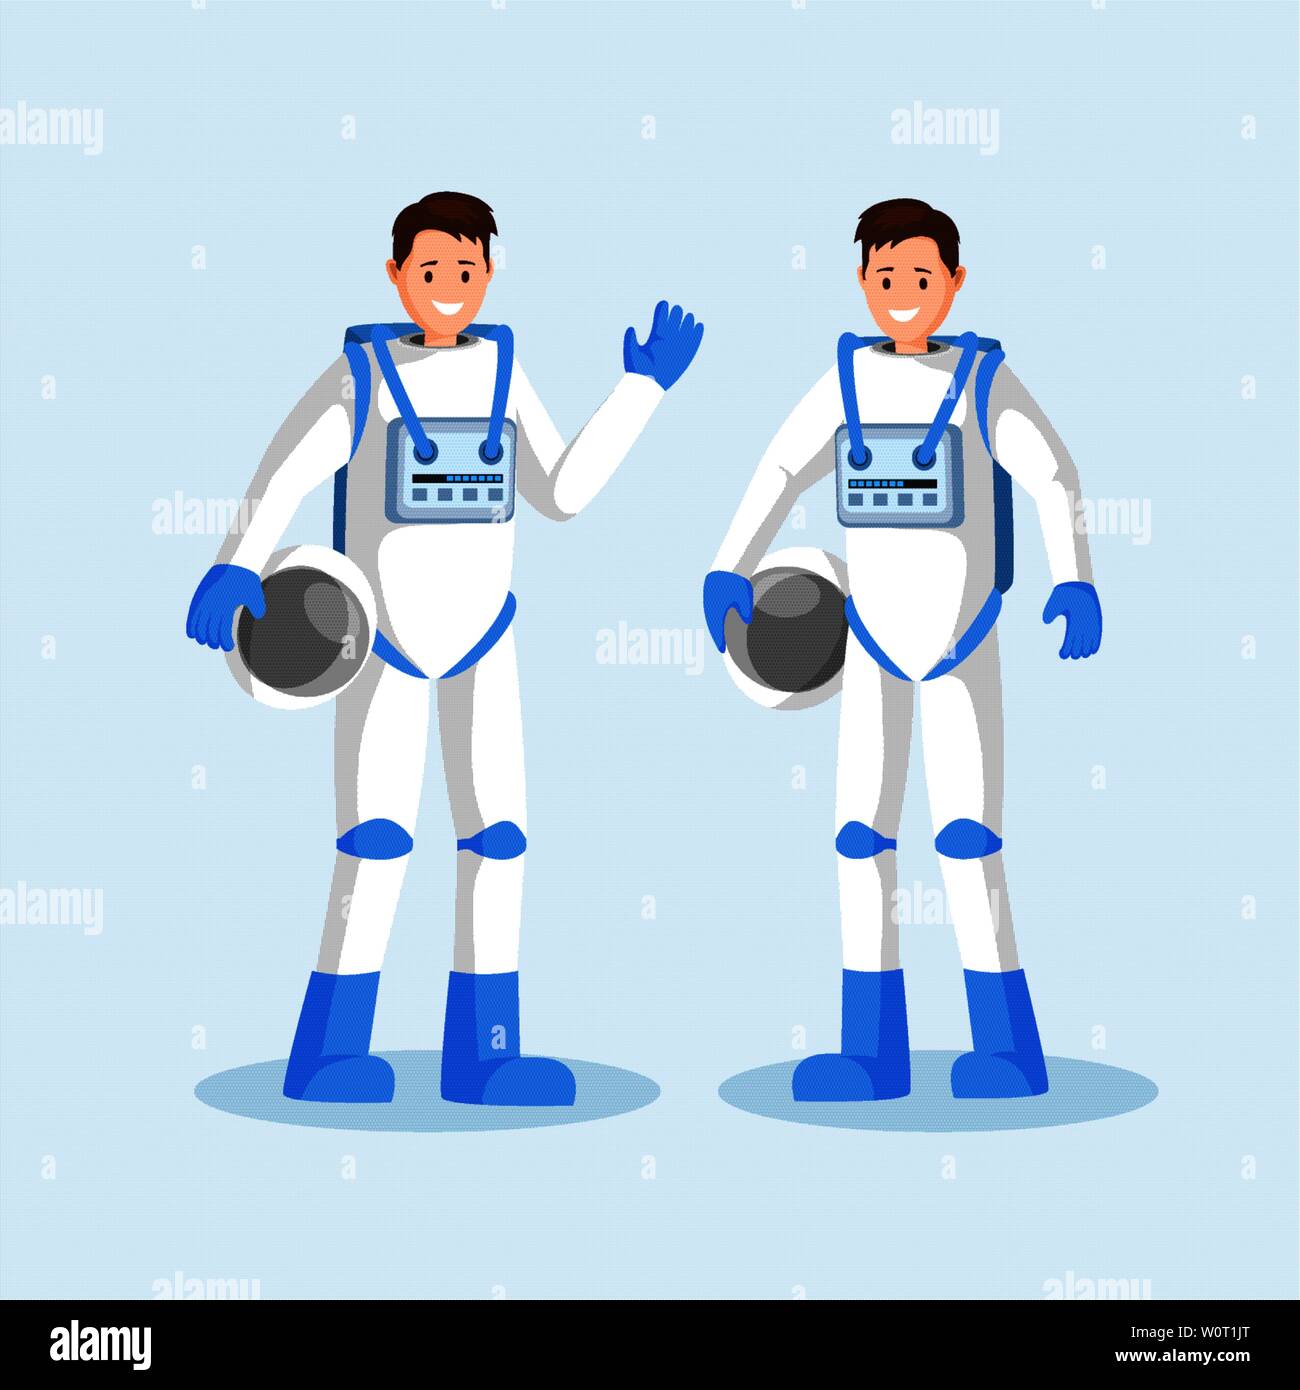 Male cosmonauts flat vector illustration. Smiling astronauts team, two men in spacesuits waving hand and holding helmets cartoon characters. Space mission, universe exploration isolated clipart Stock Vector